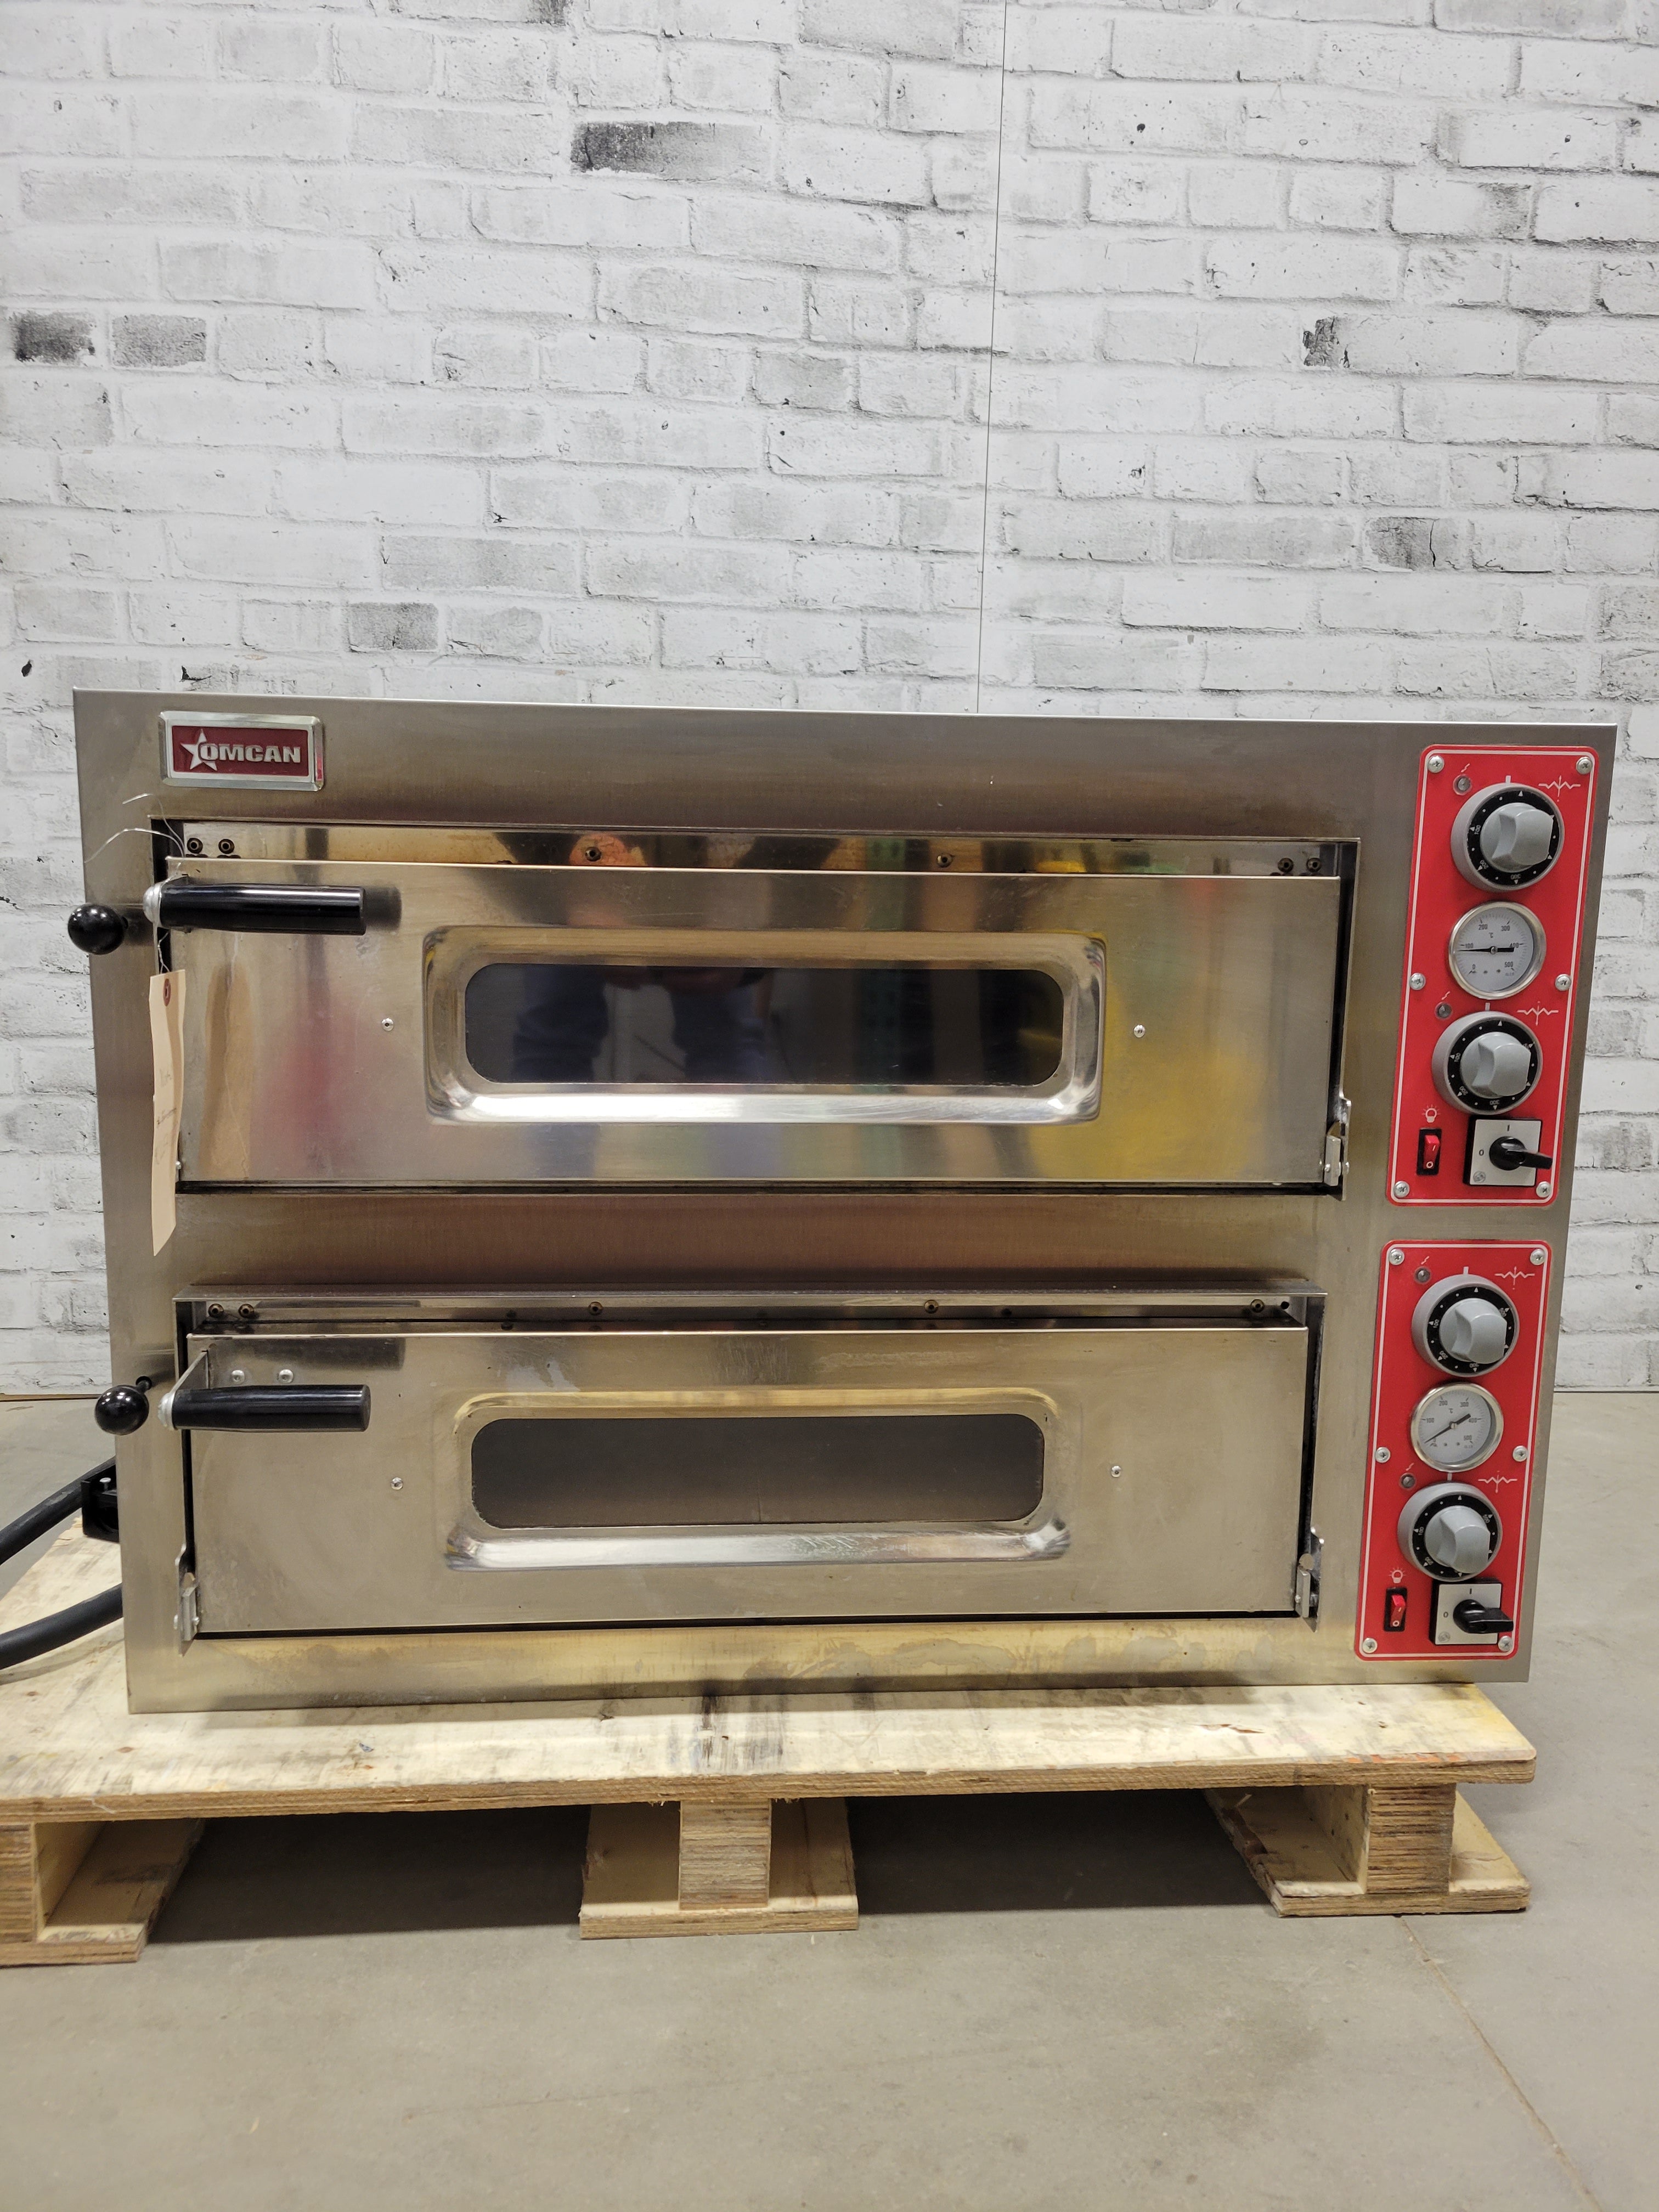 Thumbnail - Omcan Double Chamber Pizza Oven Entry PE-IT-0038-D/Max 8 Series